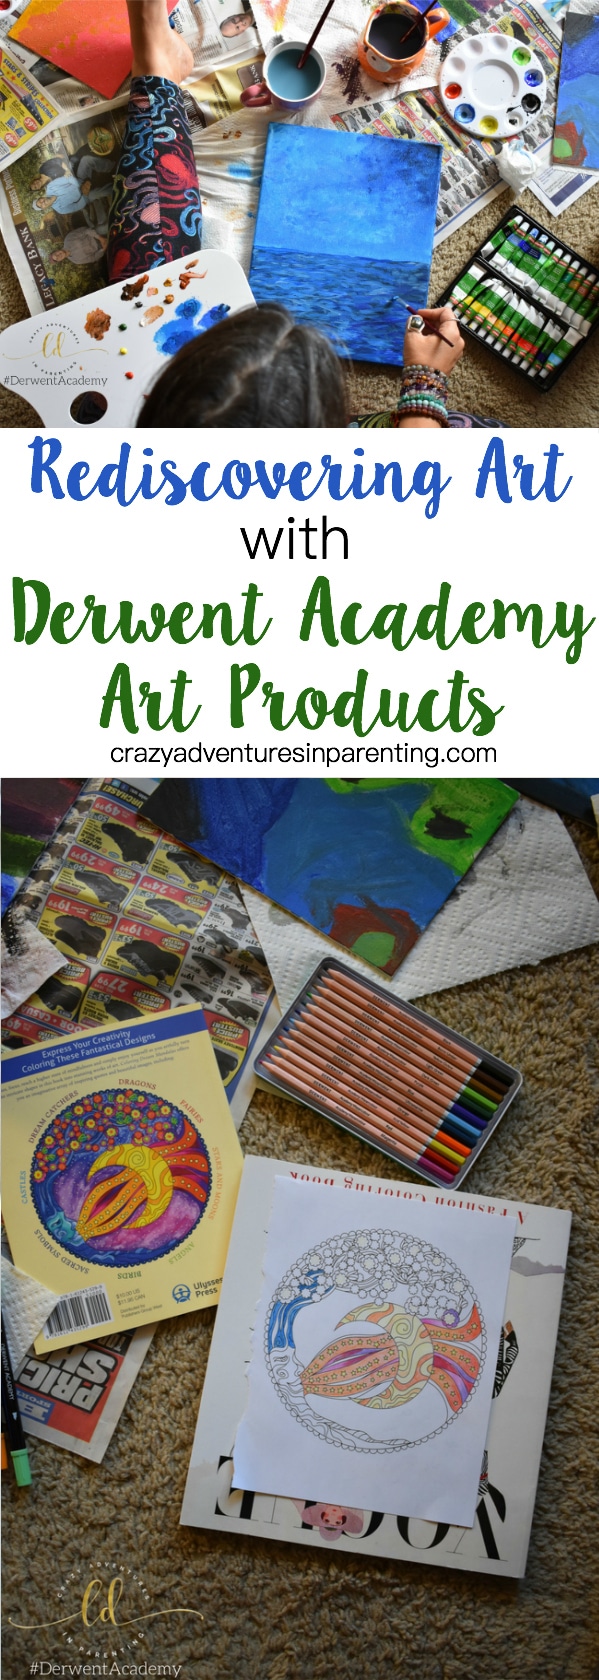 Rediscovering Art with Derwent Academy Art Products